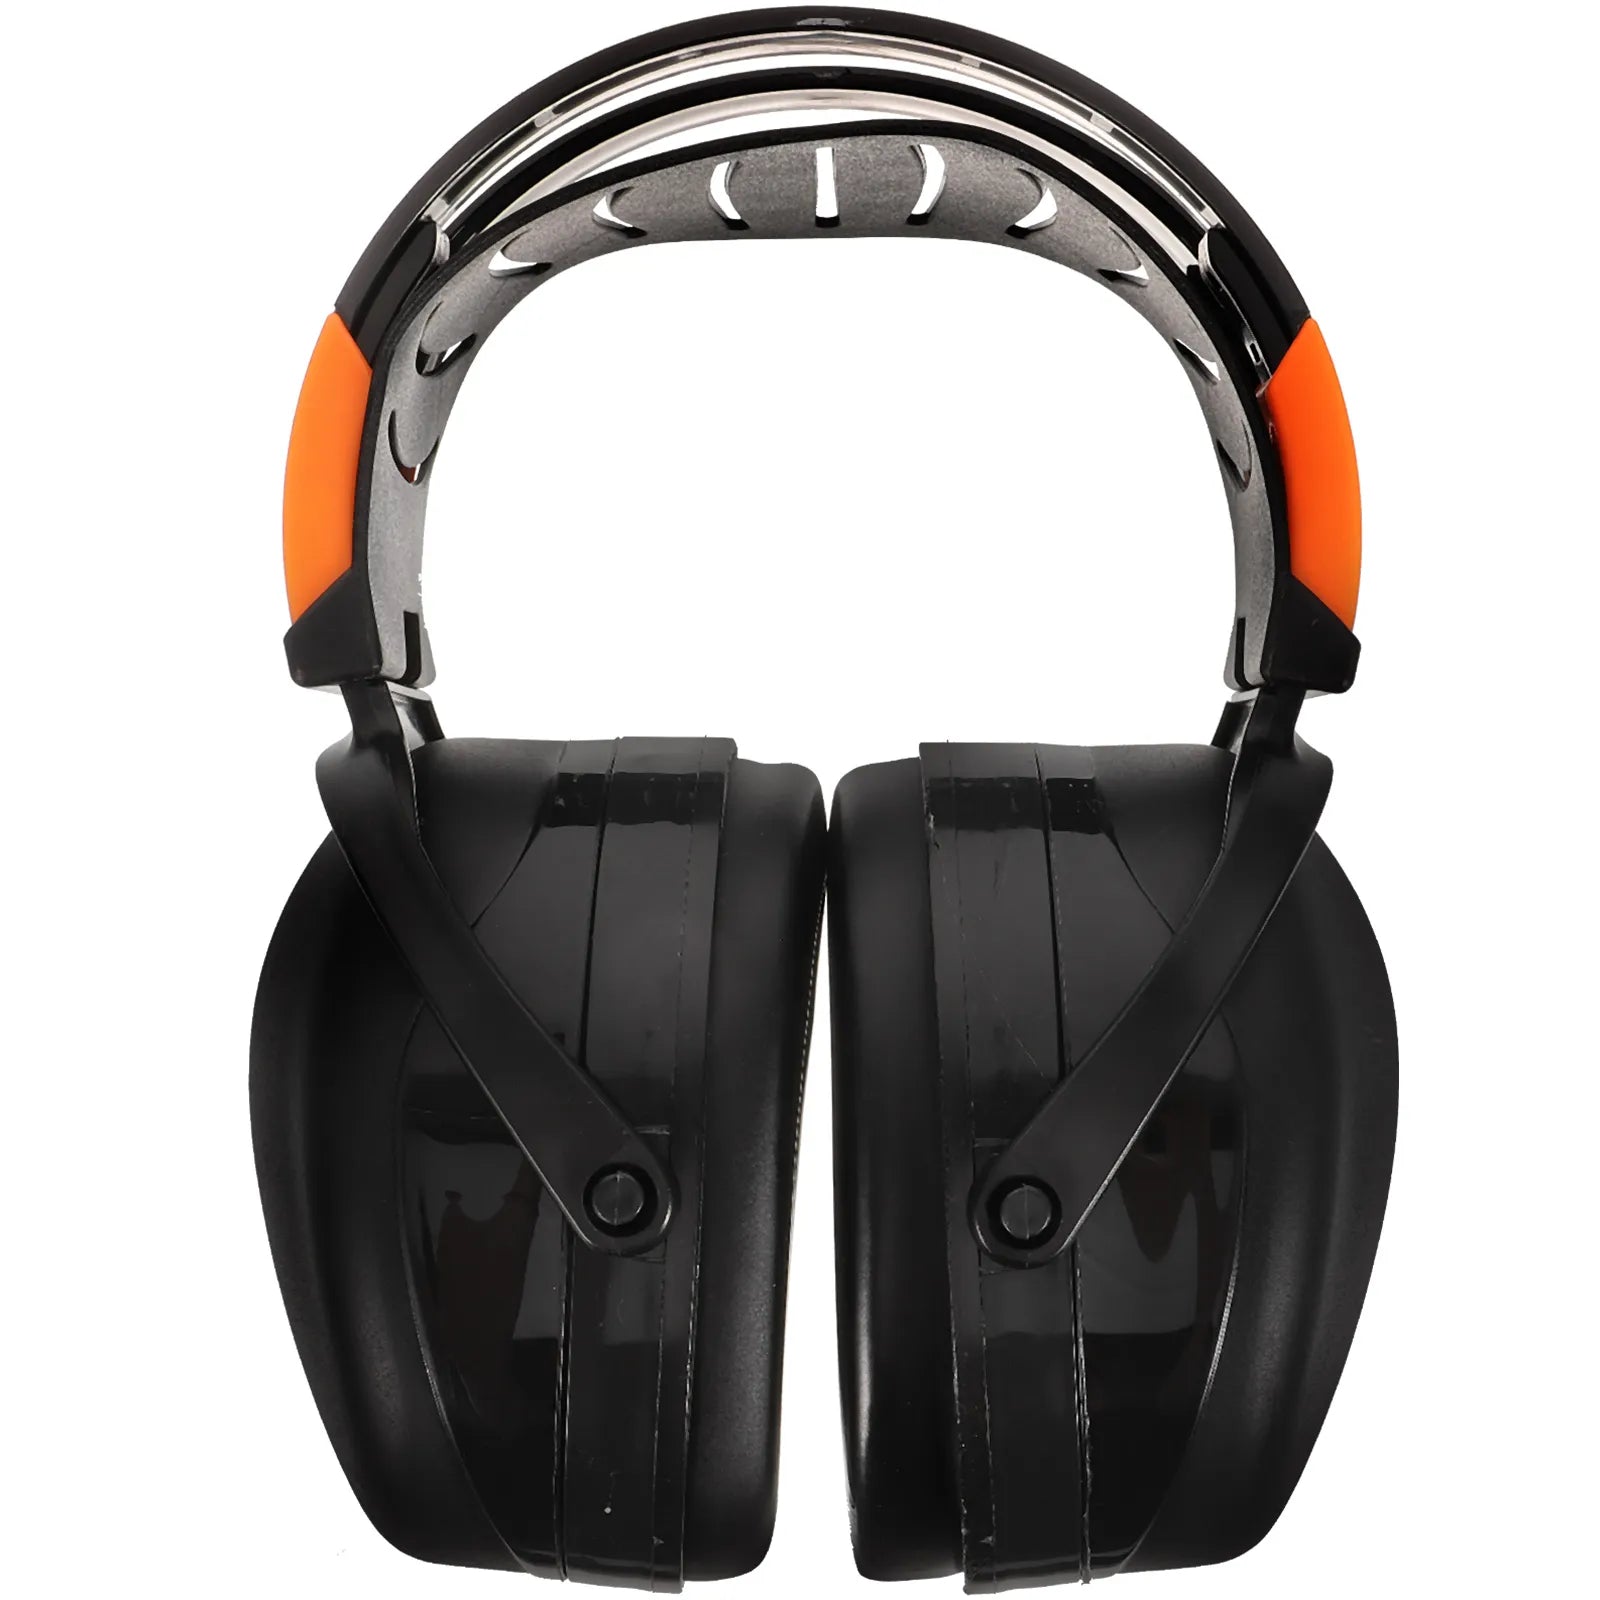 Headphones Noise Cancel Sound Blocking Ear Plugs Soundproof Earmuffs Reduction Shooting Protection Reducing Hearing Headset